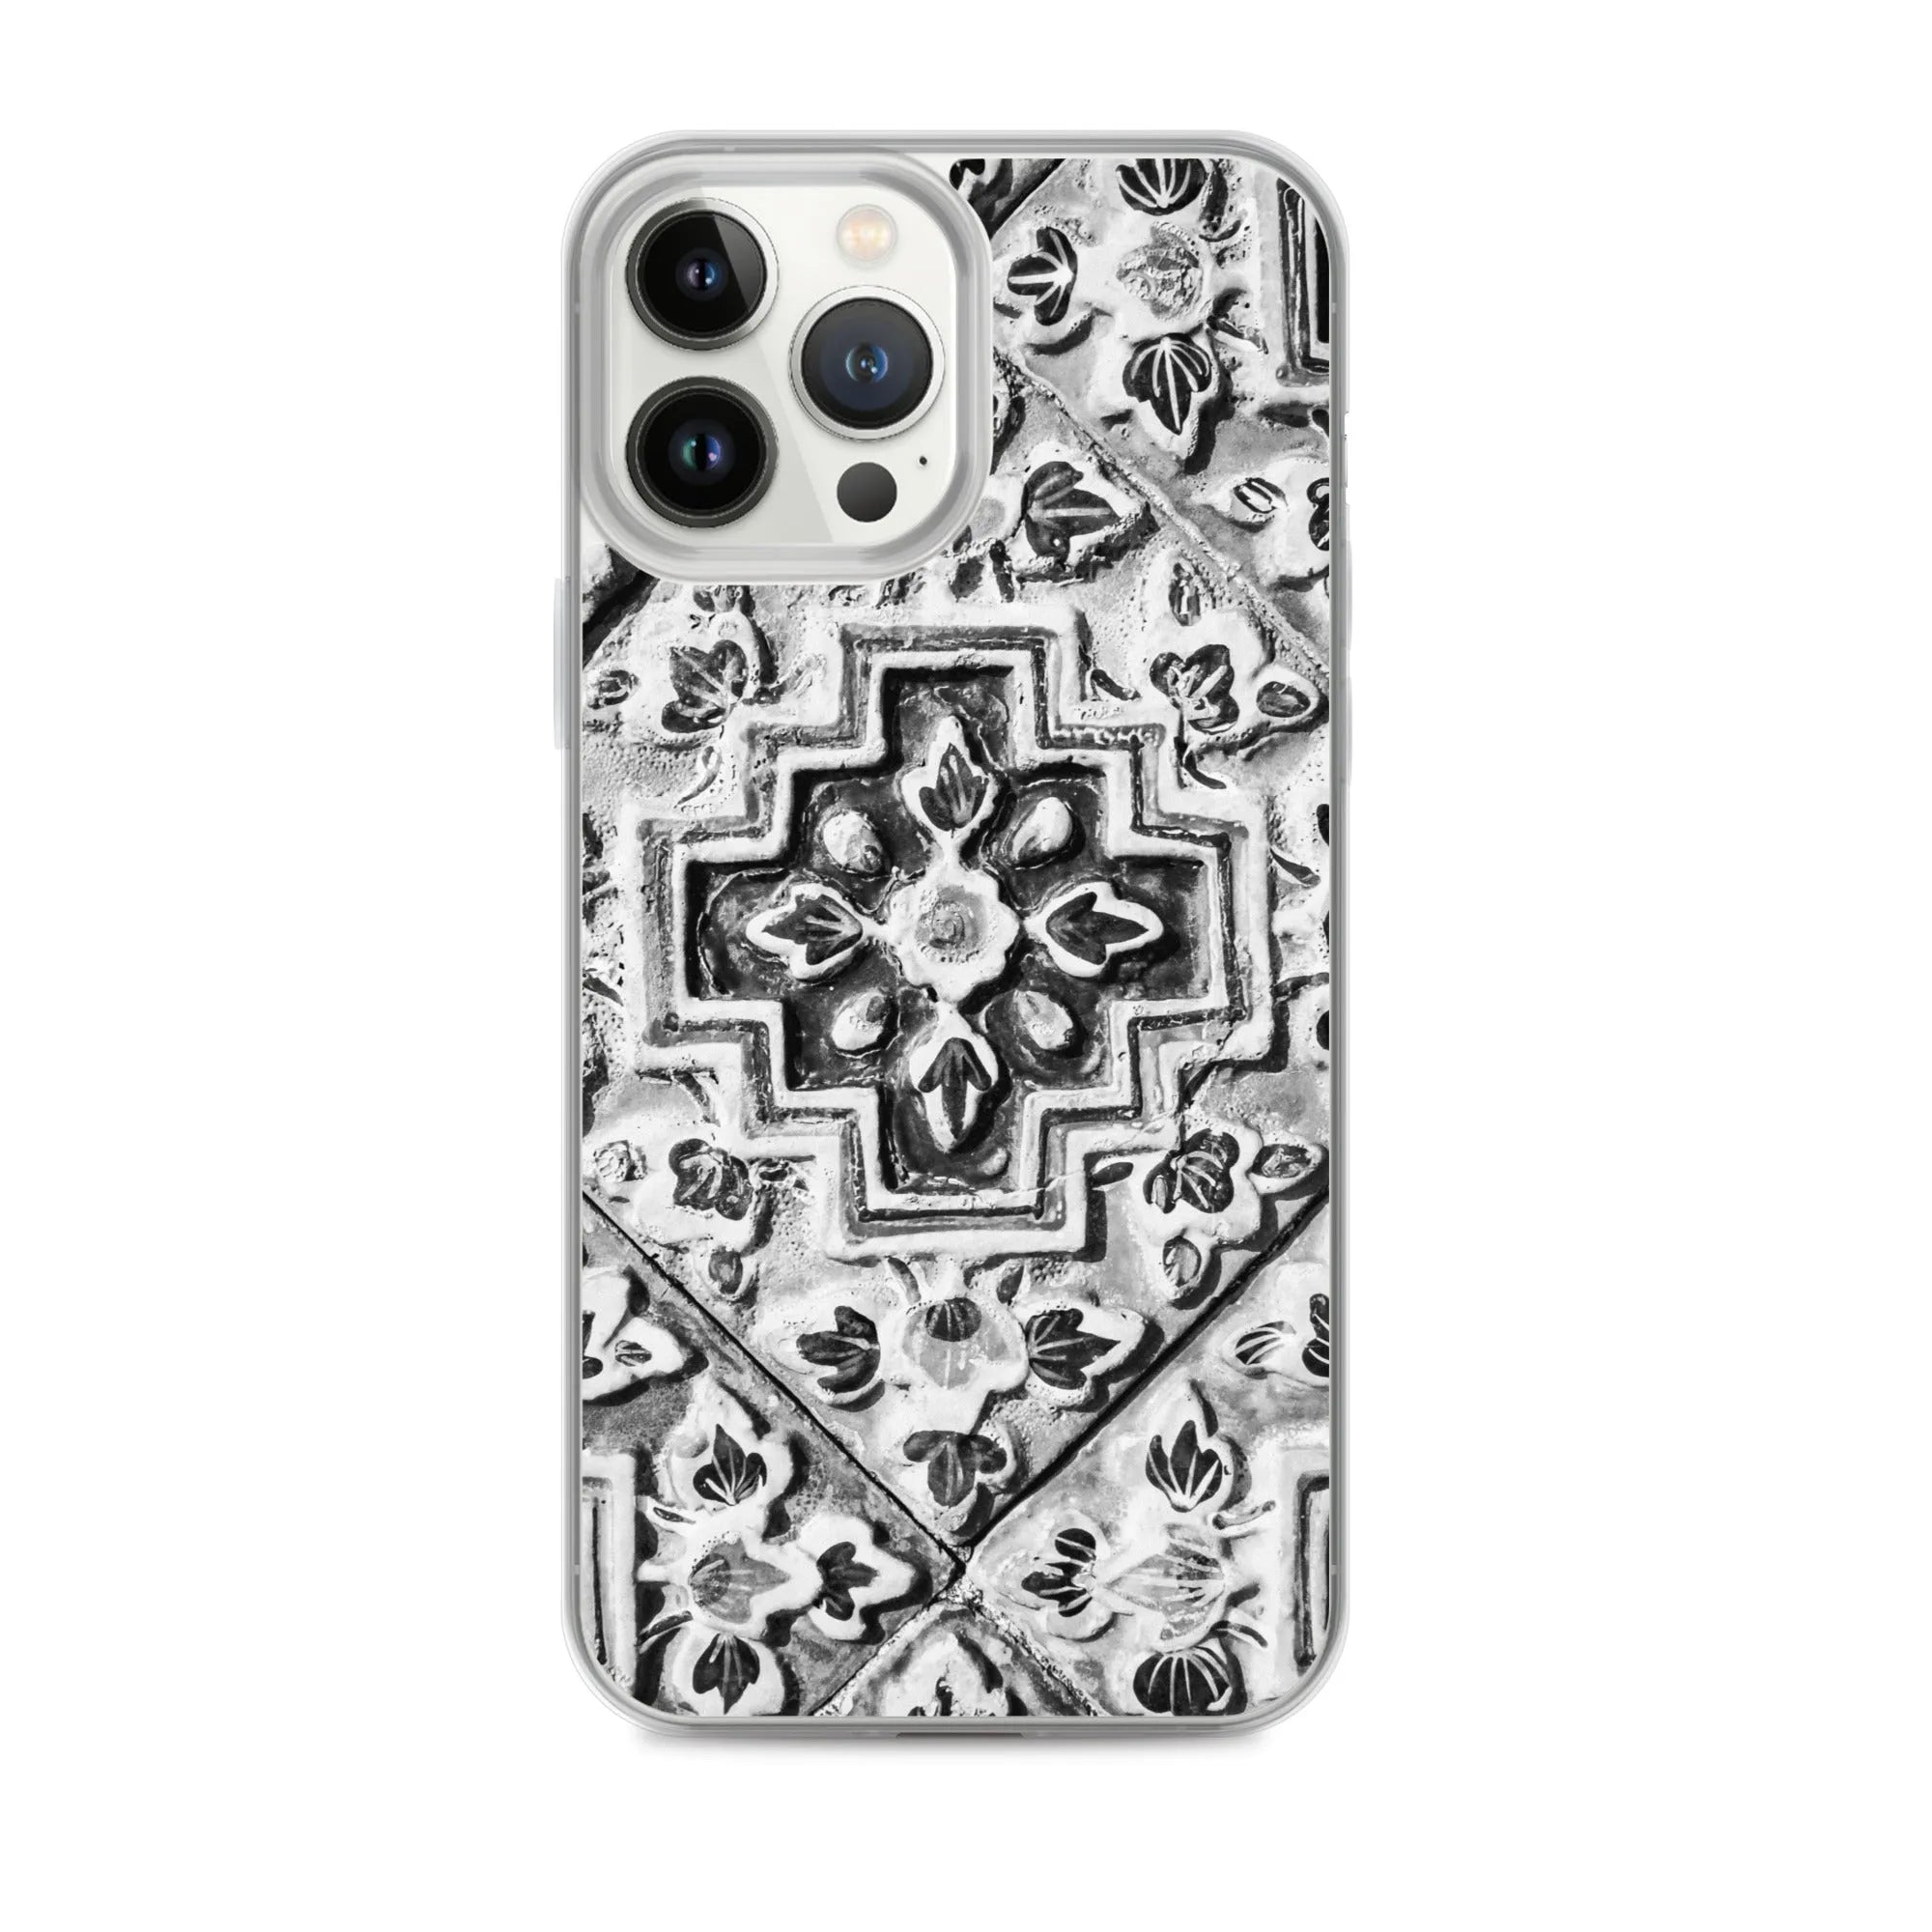 Tactile - Designer Travels Art Iphone Case - Black And White - Iphone 13 Pro Max - Mobile Phone Cases - Aesthetic Art